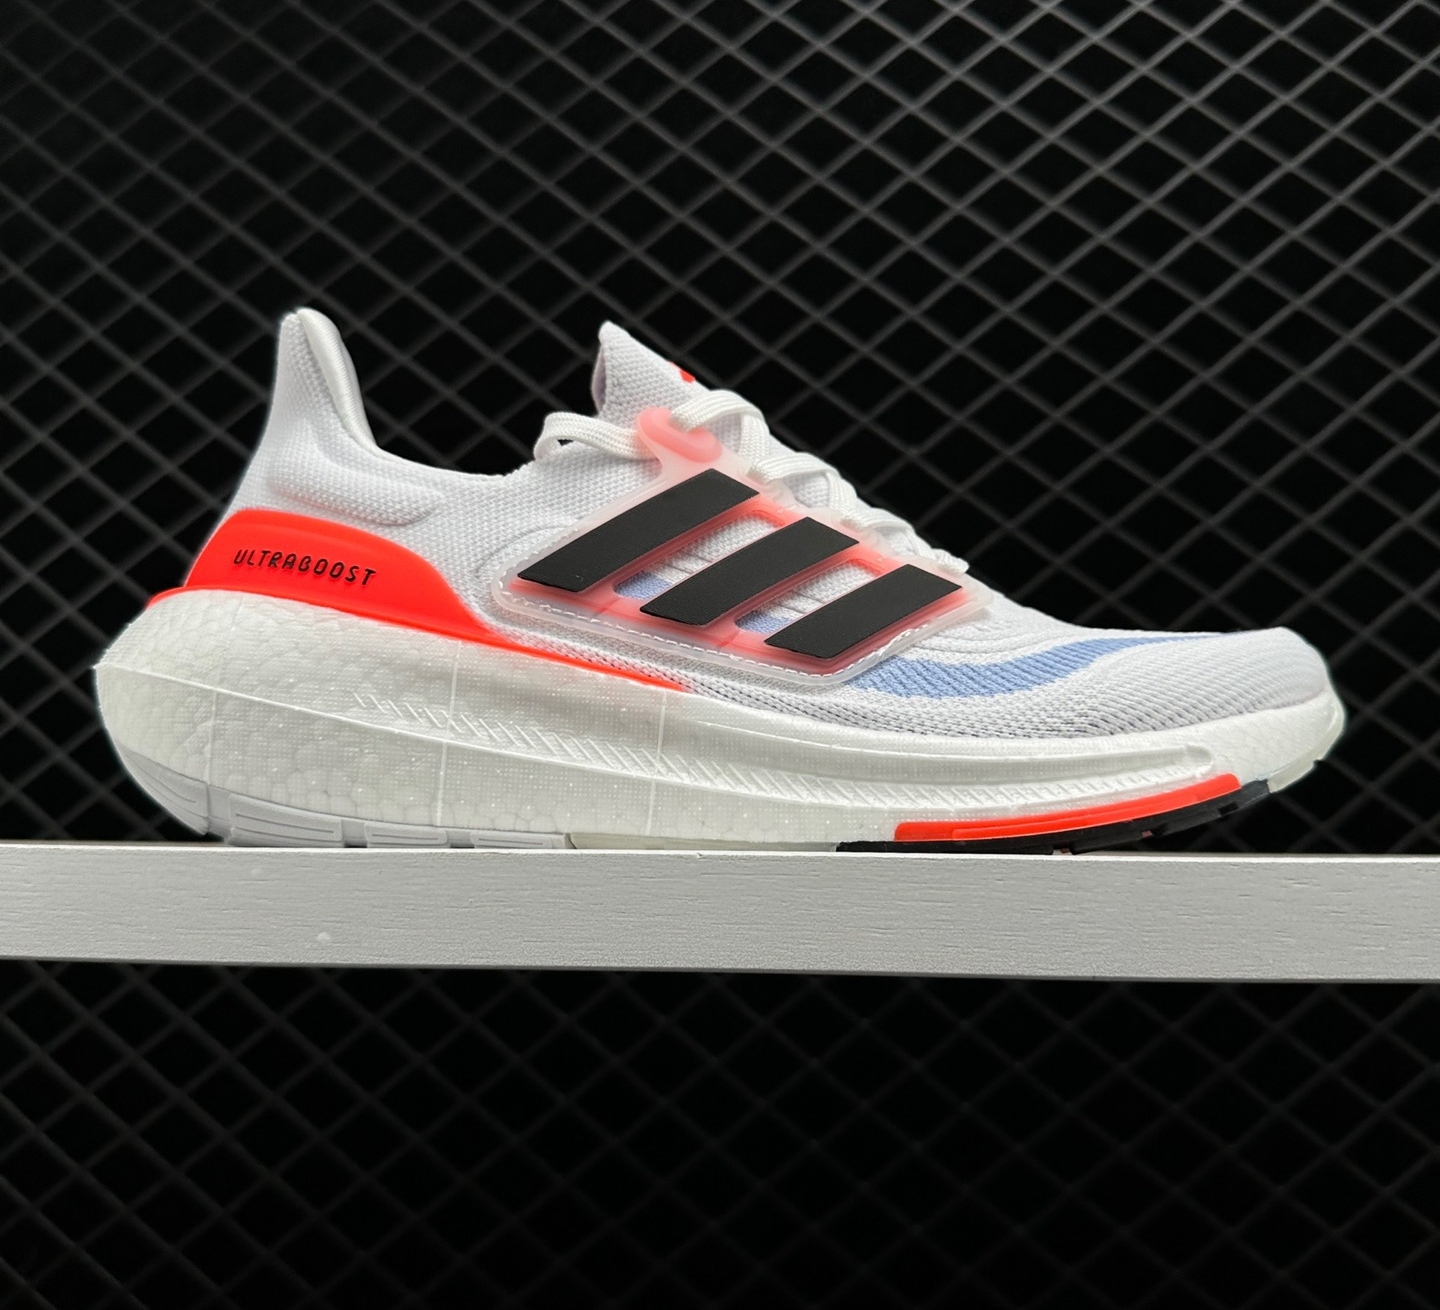 Adidas Ultra Boost Light White Black Solar Red - HQ6351: Top Performance and Style